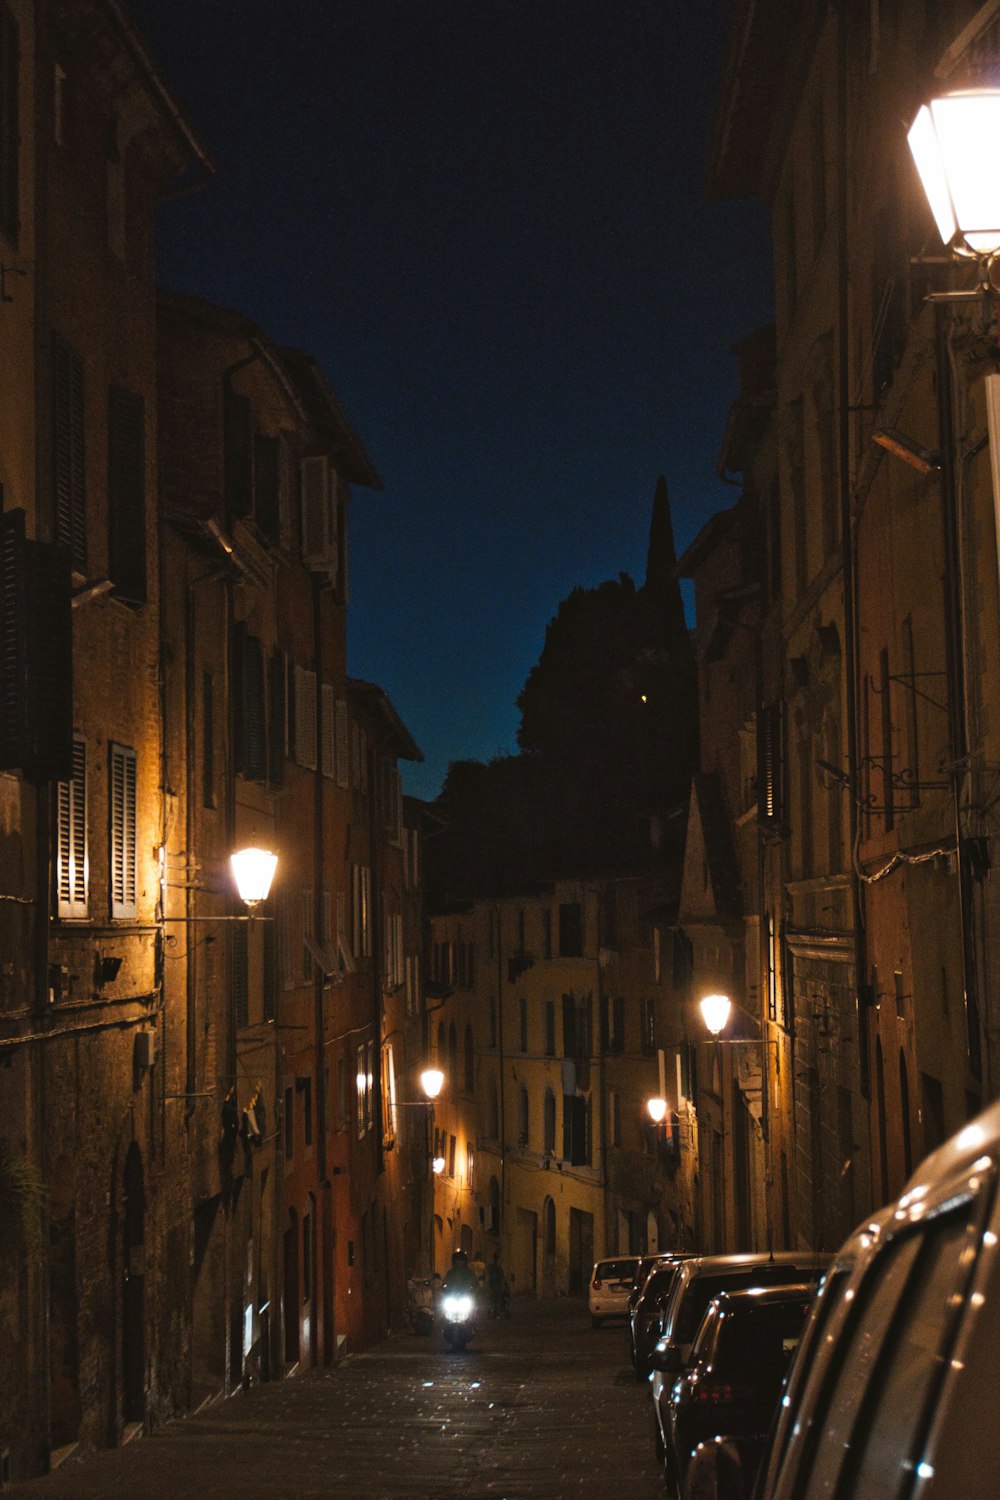 a street with cars on it at night